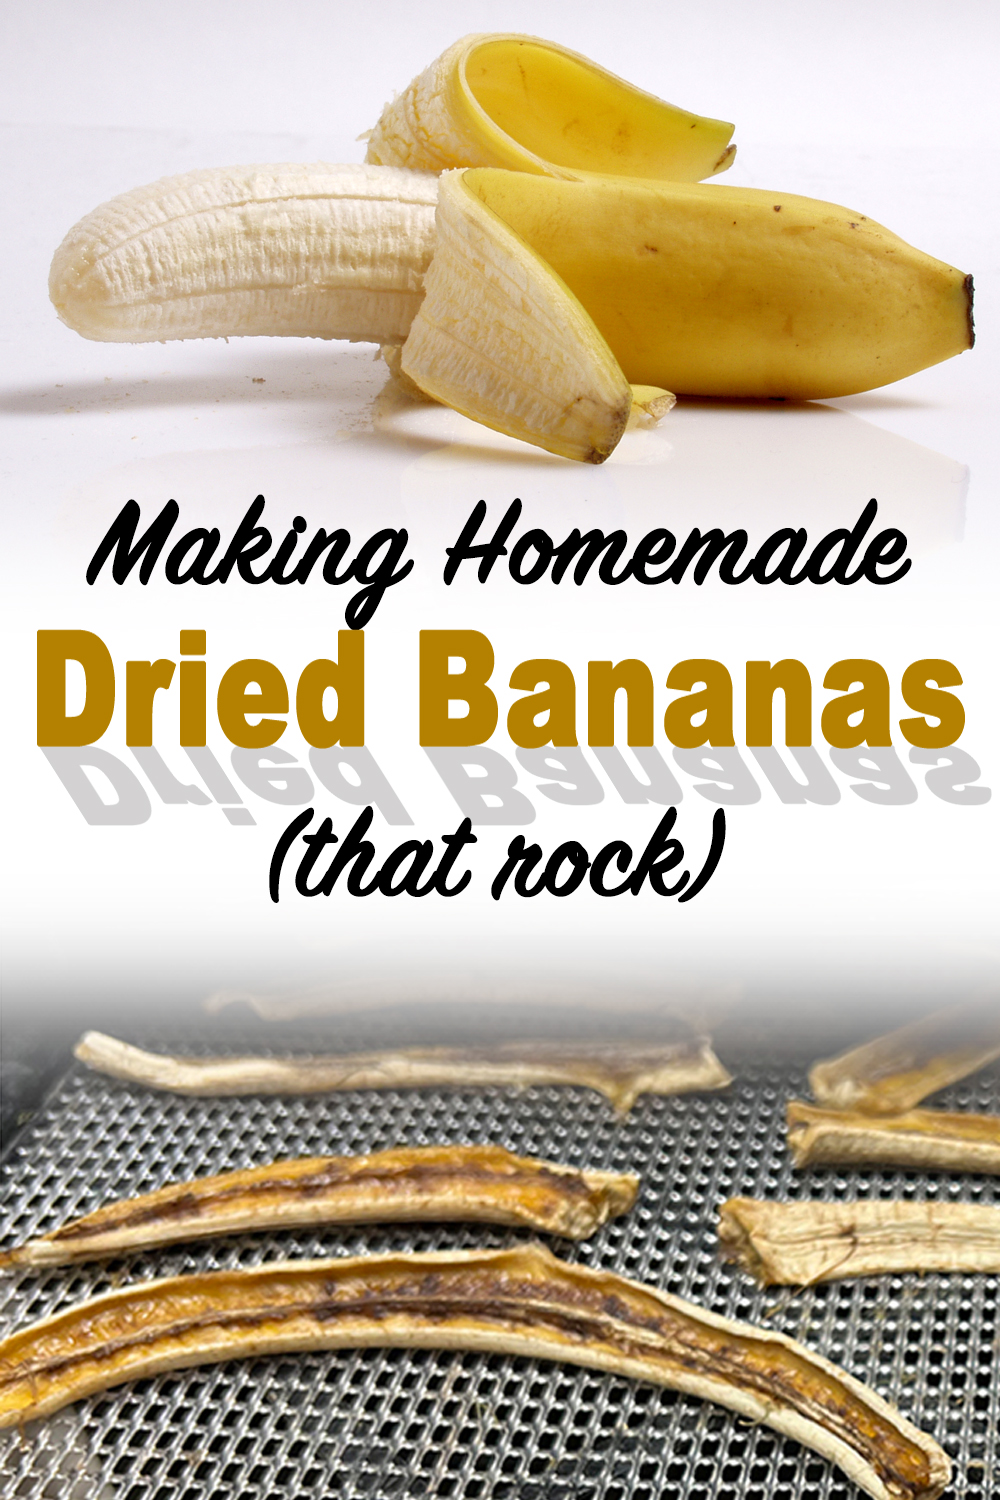 Making Bananas into a Dried Fruit Snack (that rocks!)